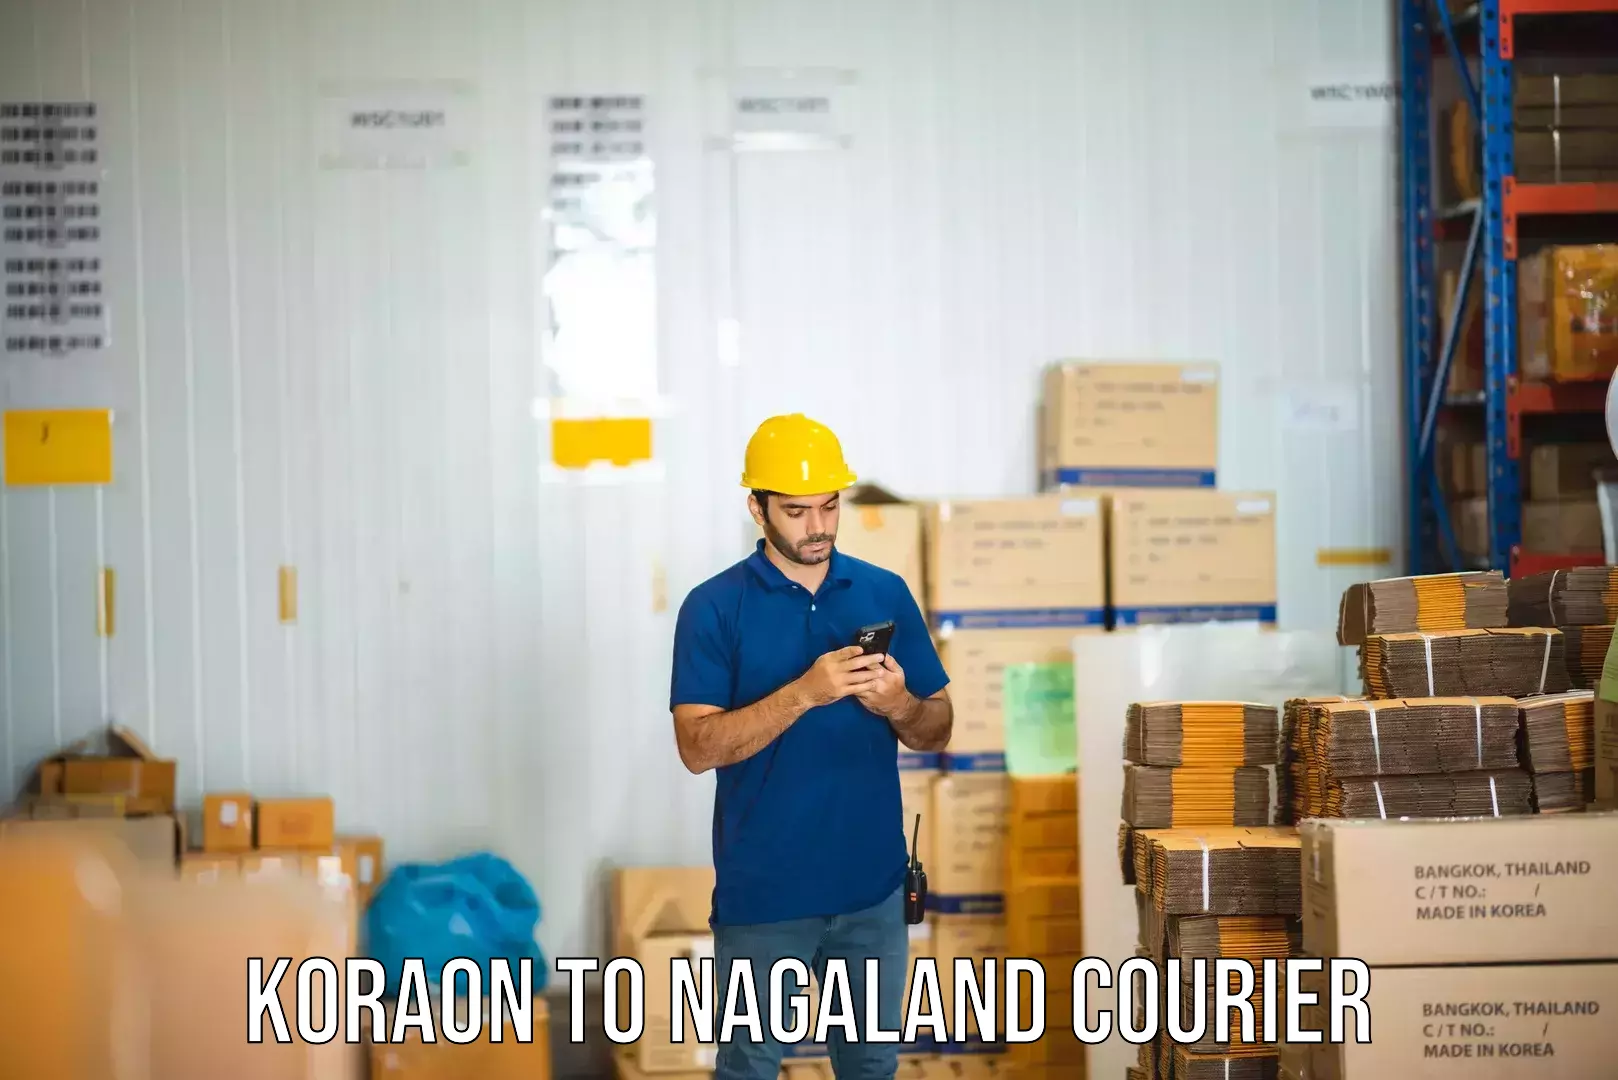 State-of-the-art courier technology Koraon to Mon